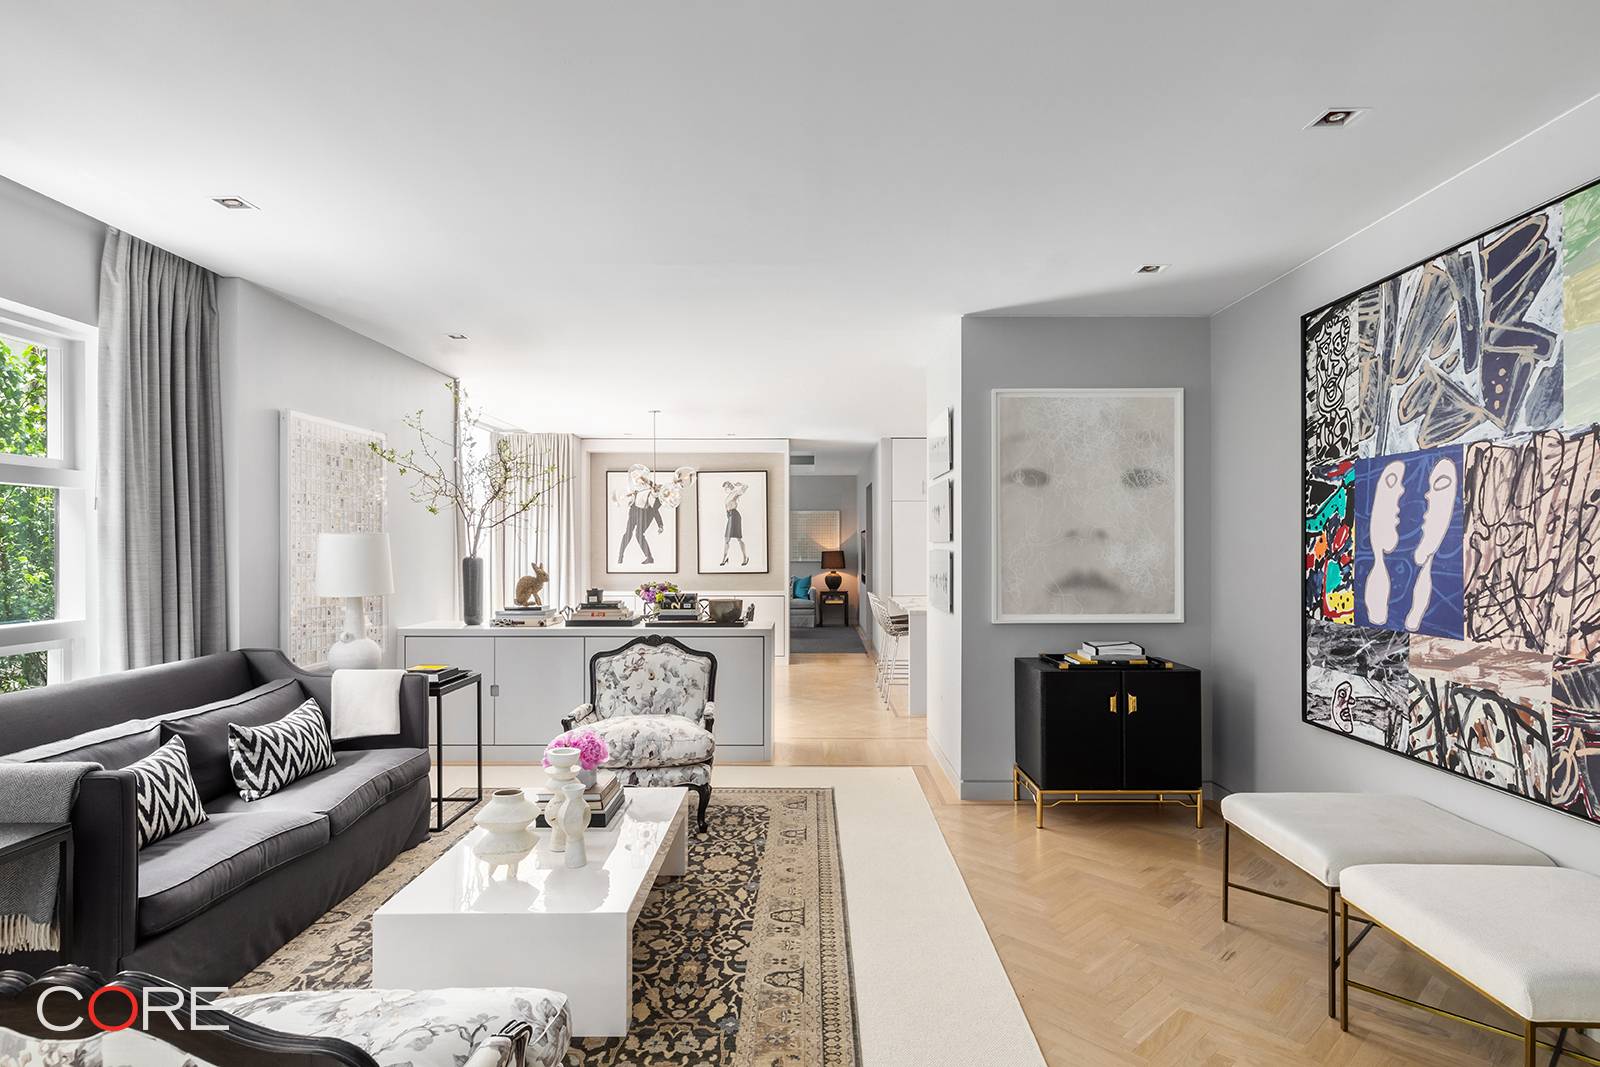 385 West 12th Street, a boutique and state of the art condominium in the West Village, boasts this magnificent 3 bedroom, 2.